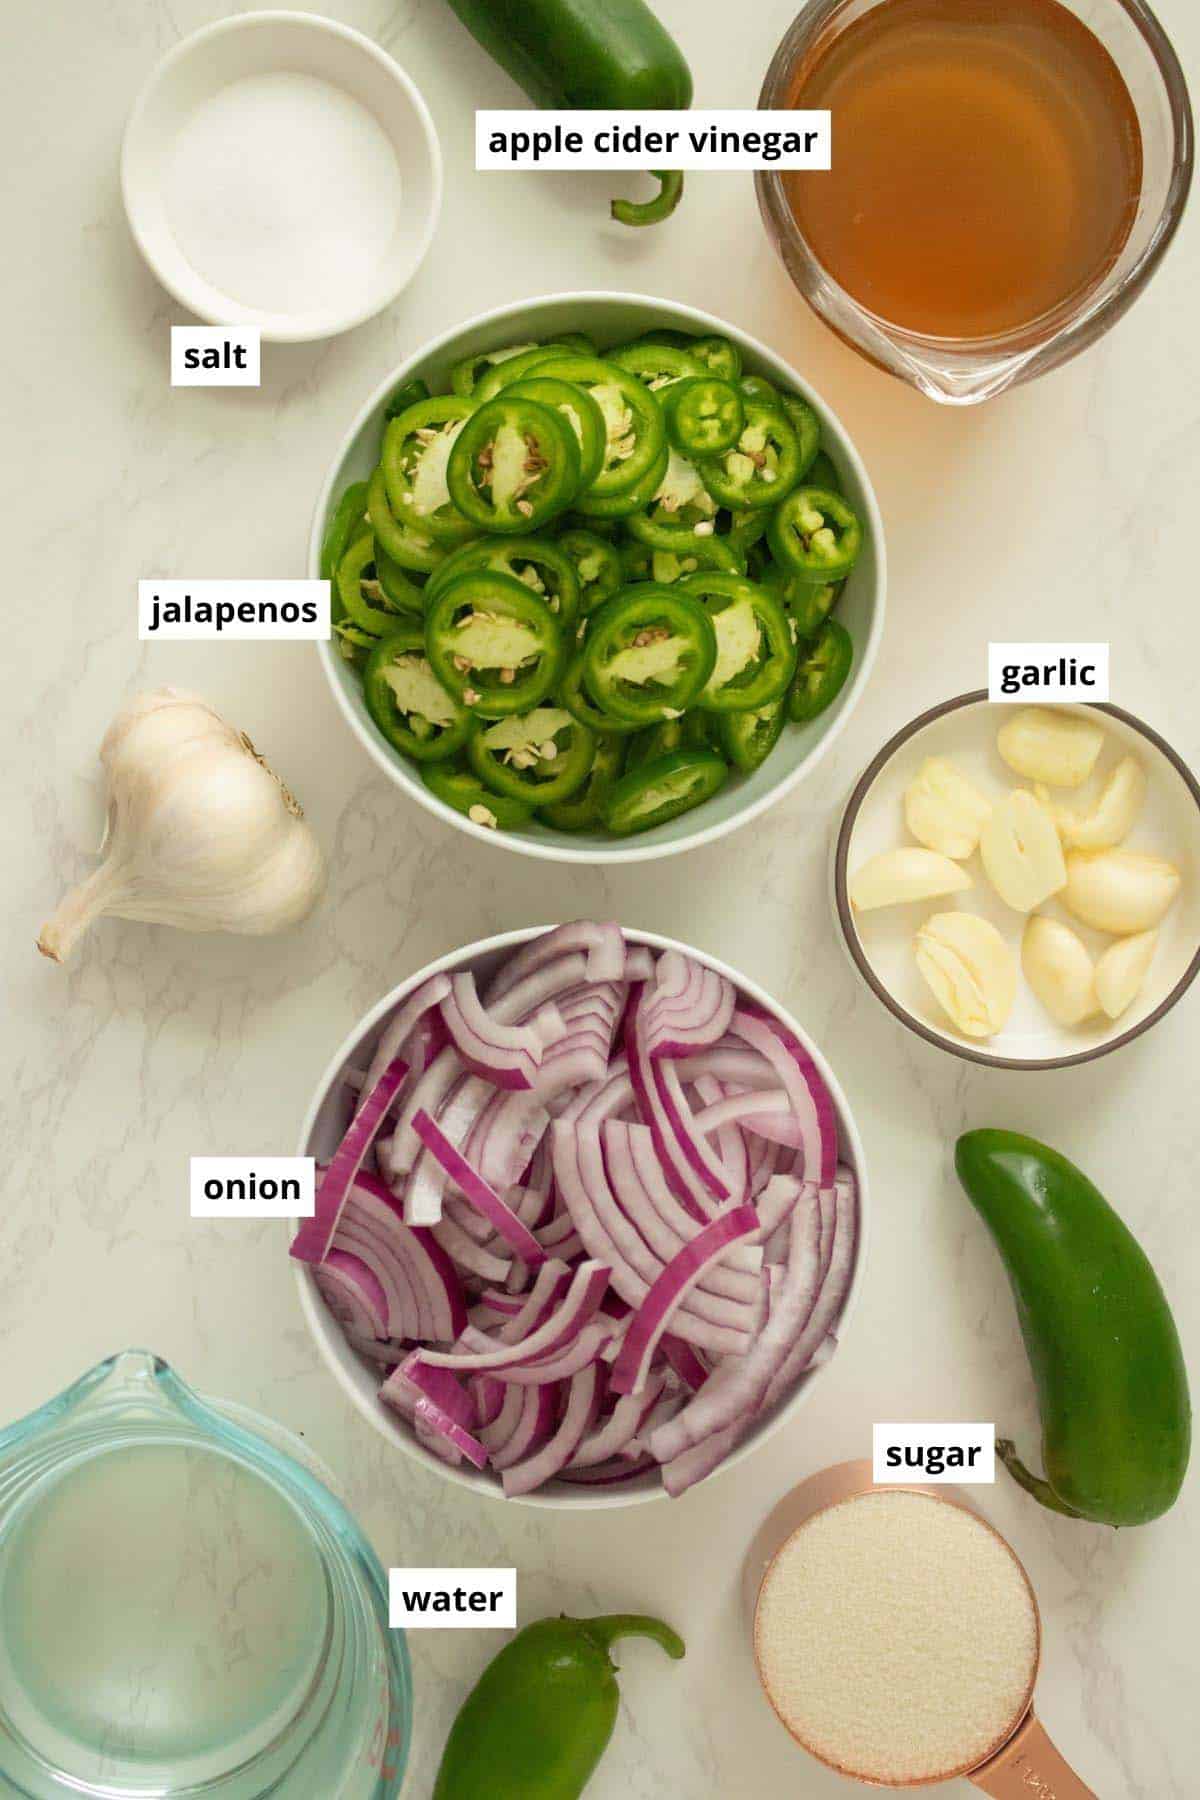 red onions, jalapeños, and other pickle ingredients in bowls on a kitchen counter